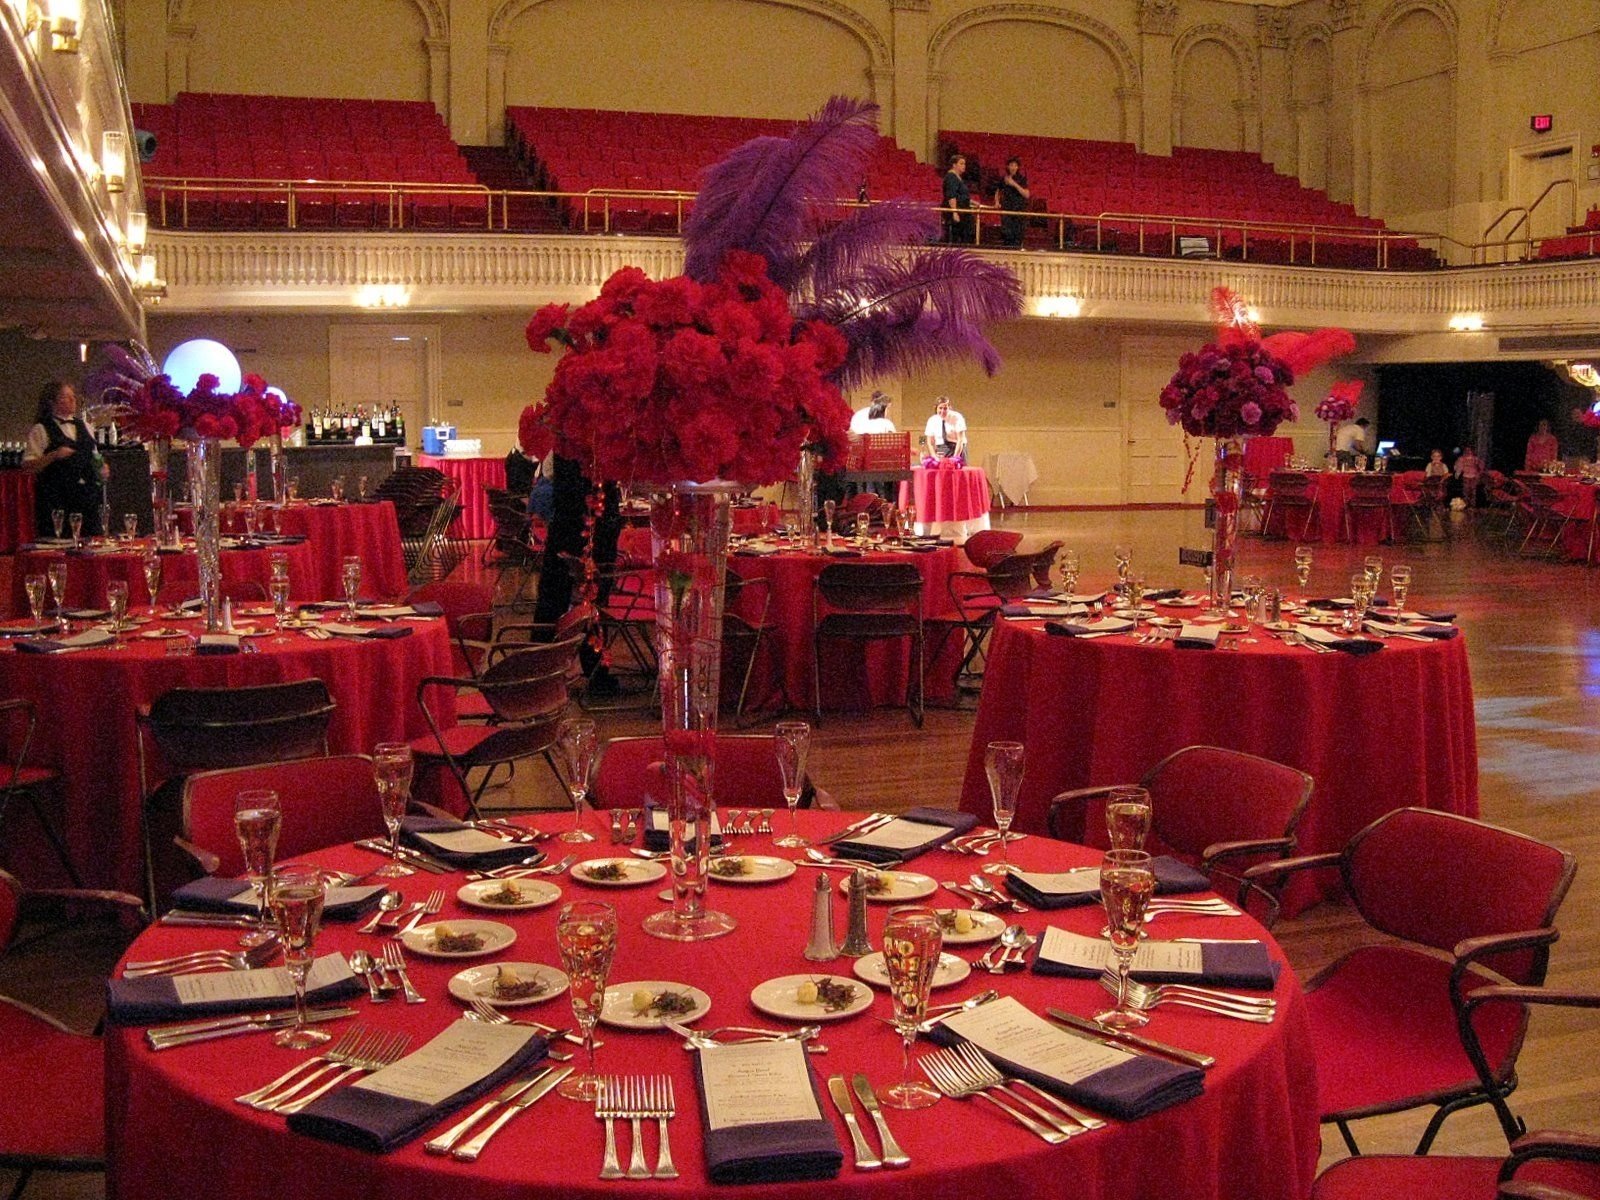 10 Lovely Red And Purple Wedding Ideas red theme awesome wedding event party ideas pinterest 2022